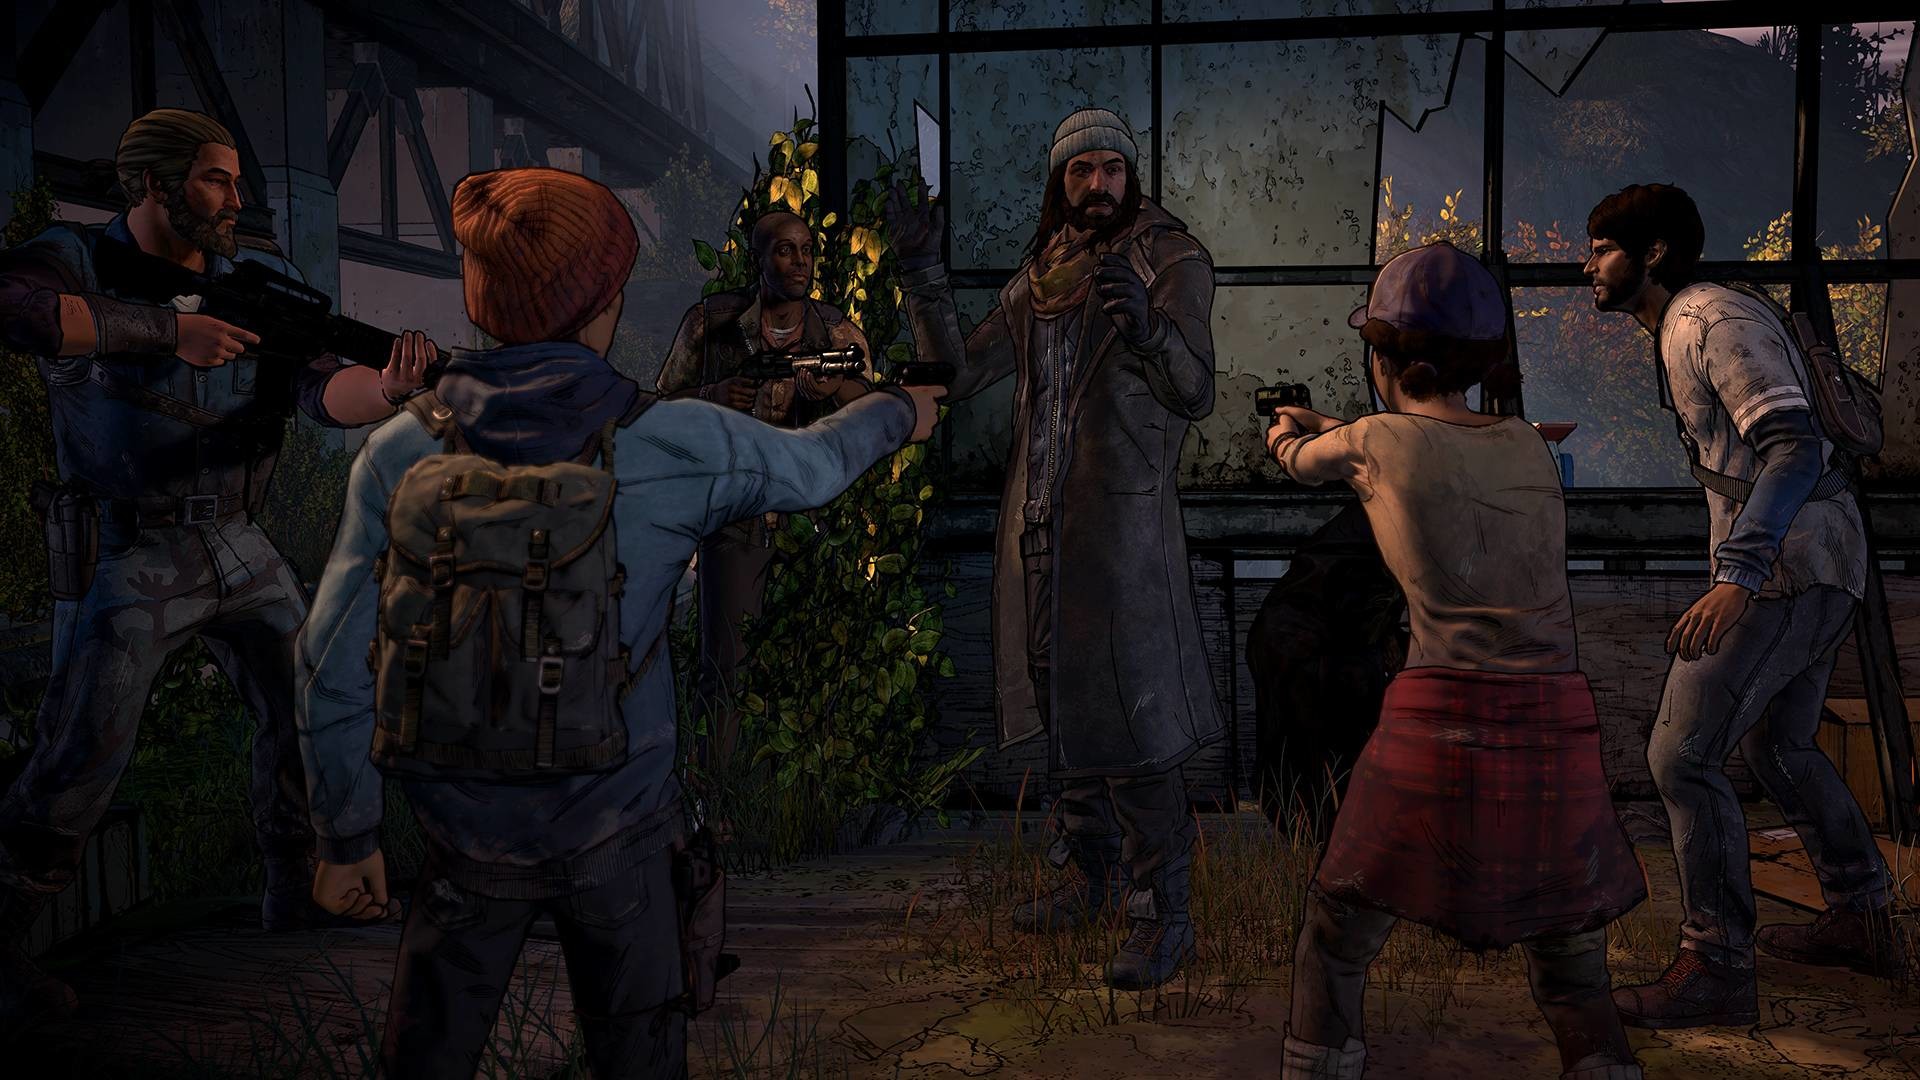 1920x1080 Video Game - The Walking Dead: A New Frontier Clementine (The Walking Dead)